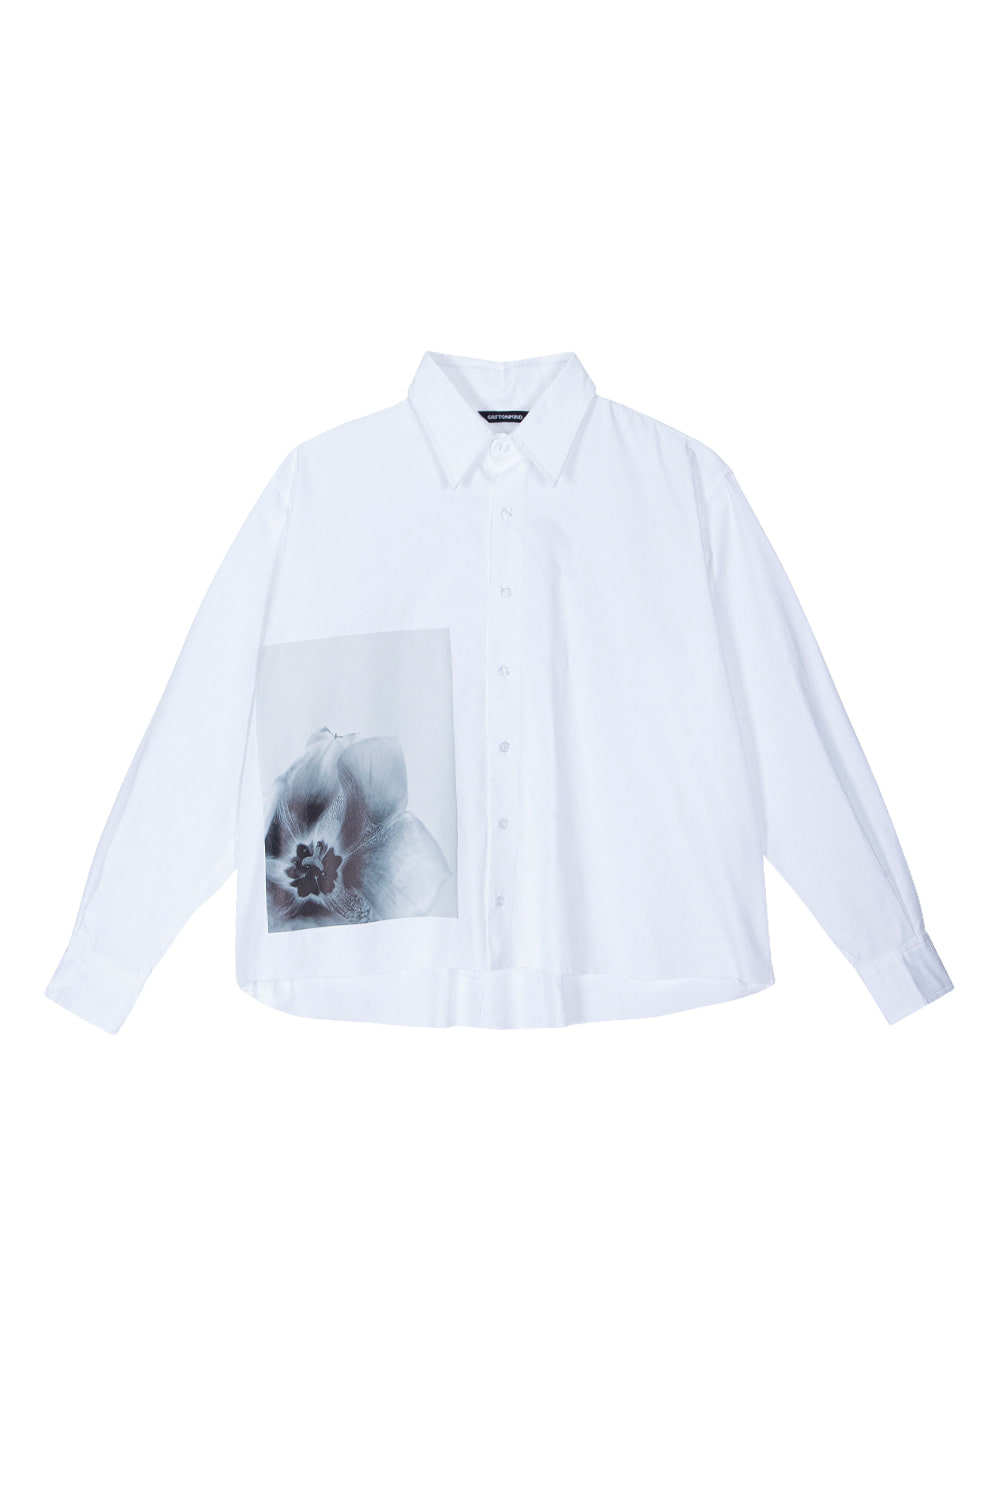 PRINTED PATCH CROPPED  DRESS SHIRTS (WHITE)GRAFFITIONMIND